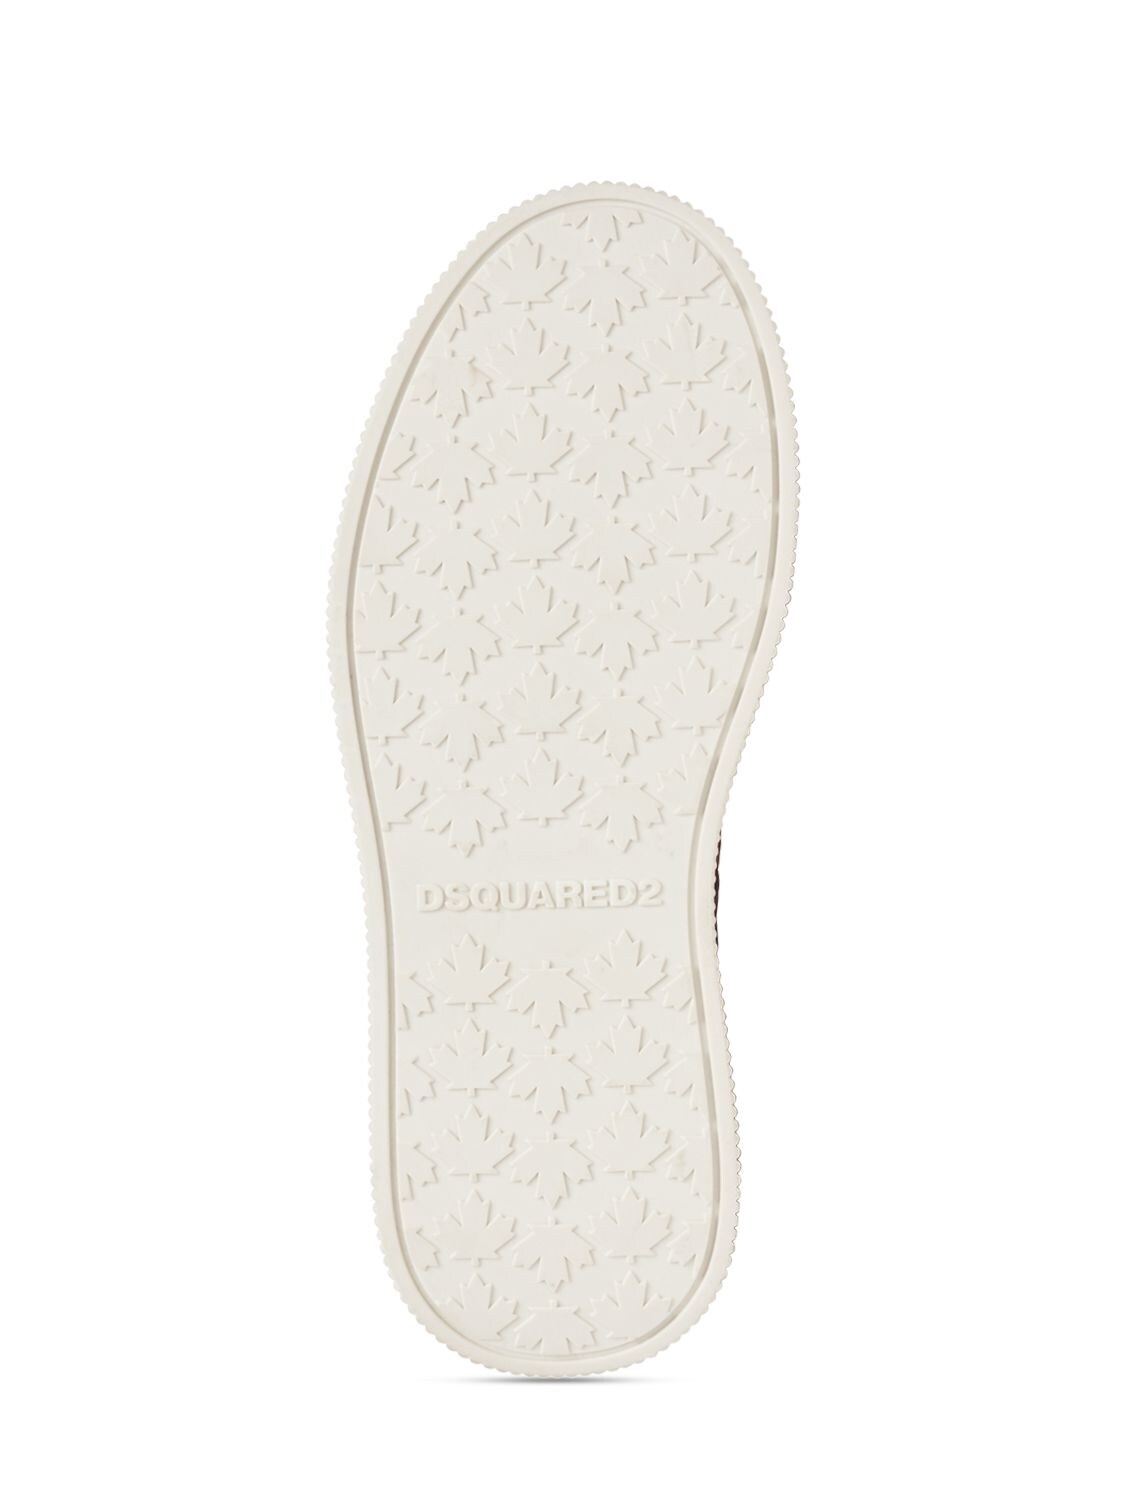 Shop Dsquared2 New Jersey Leather Sneakers In White,pink